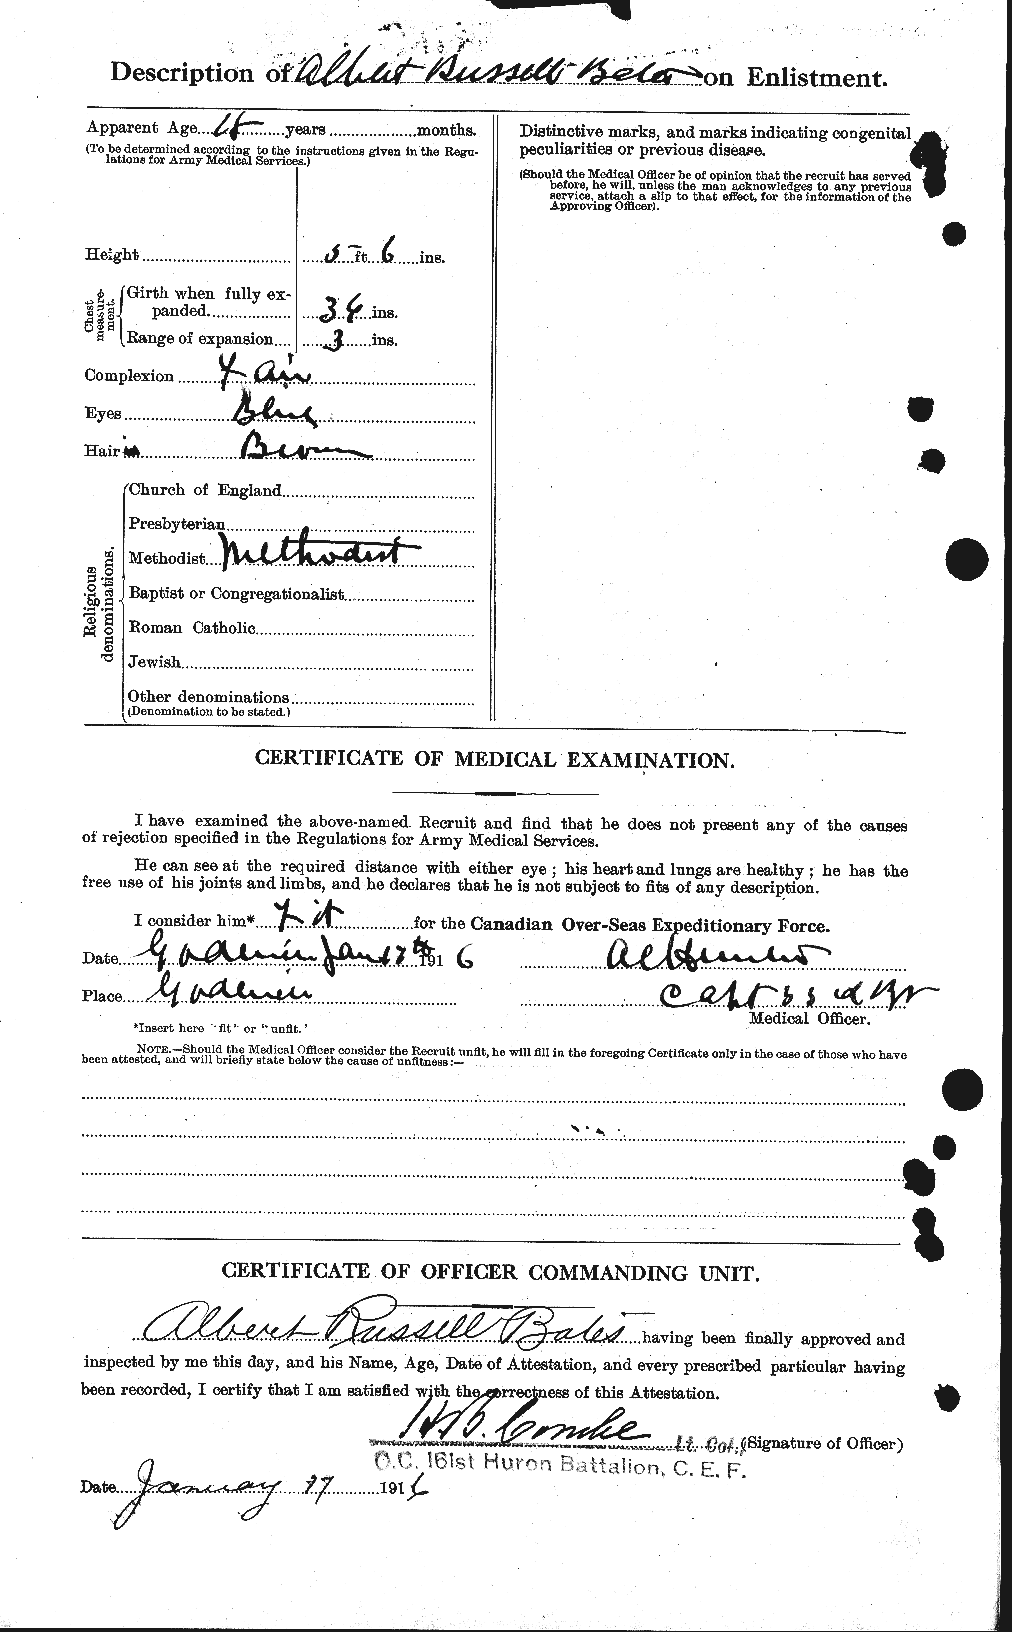 Personnel Records of the First World War - CEF 227938b